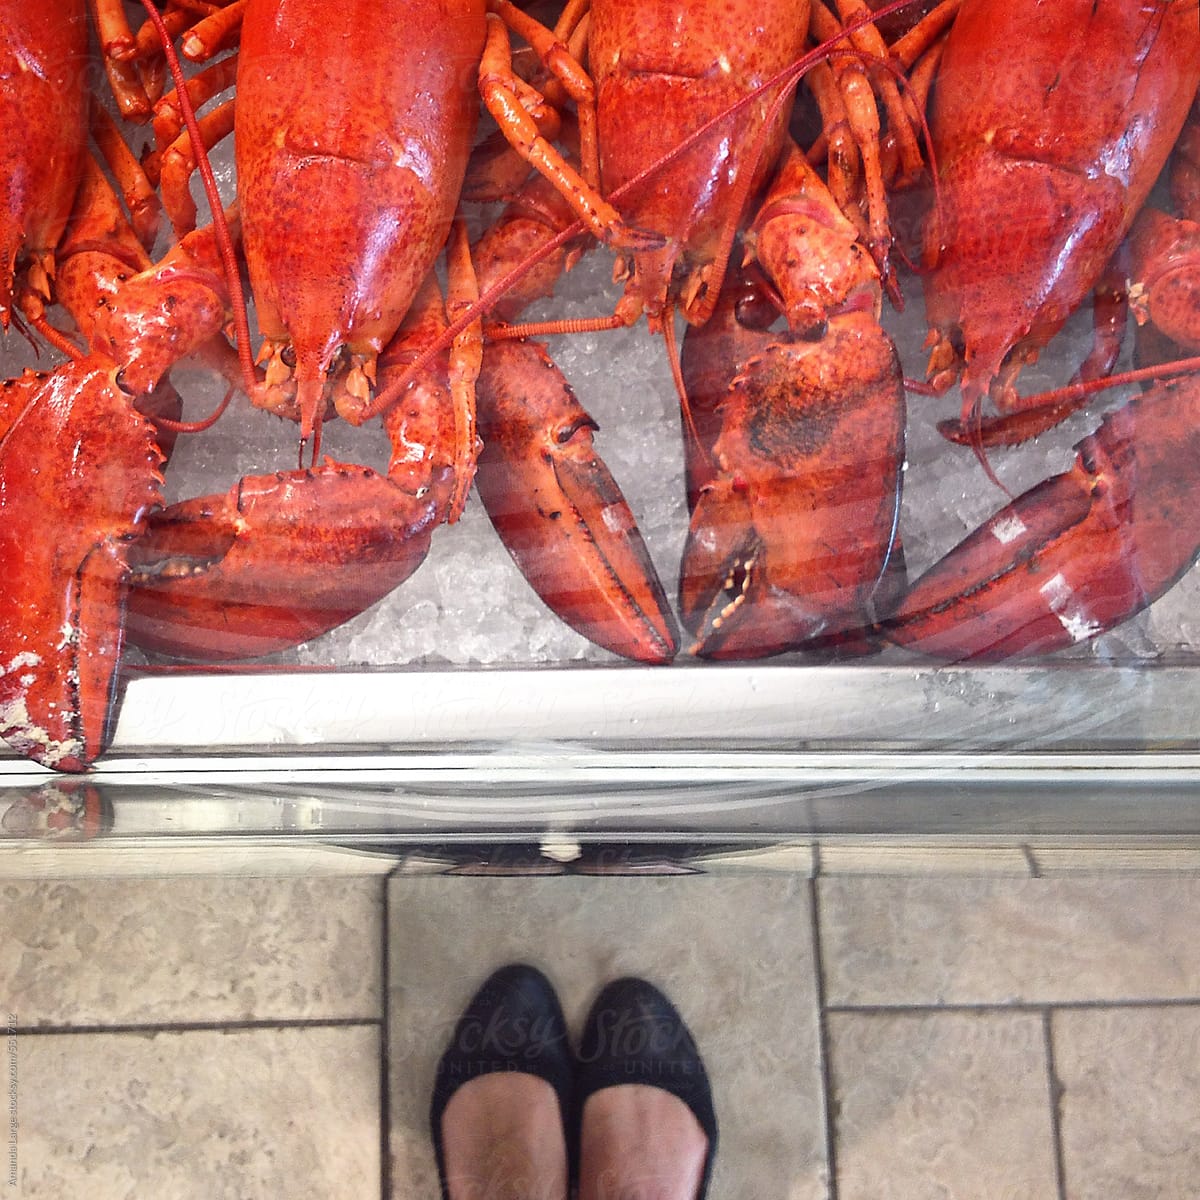 looking down at a freezer of lobsters